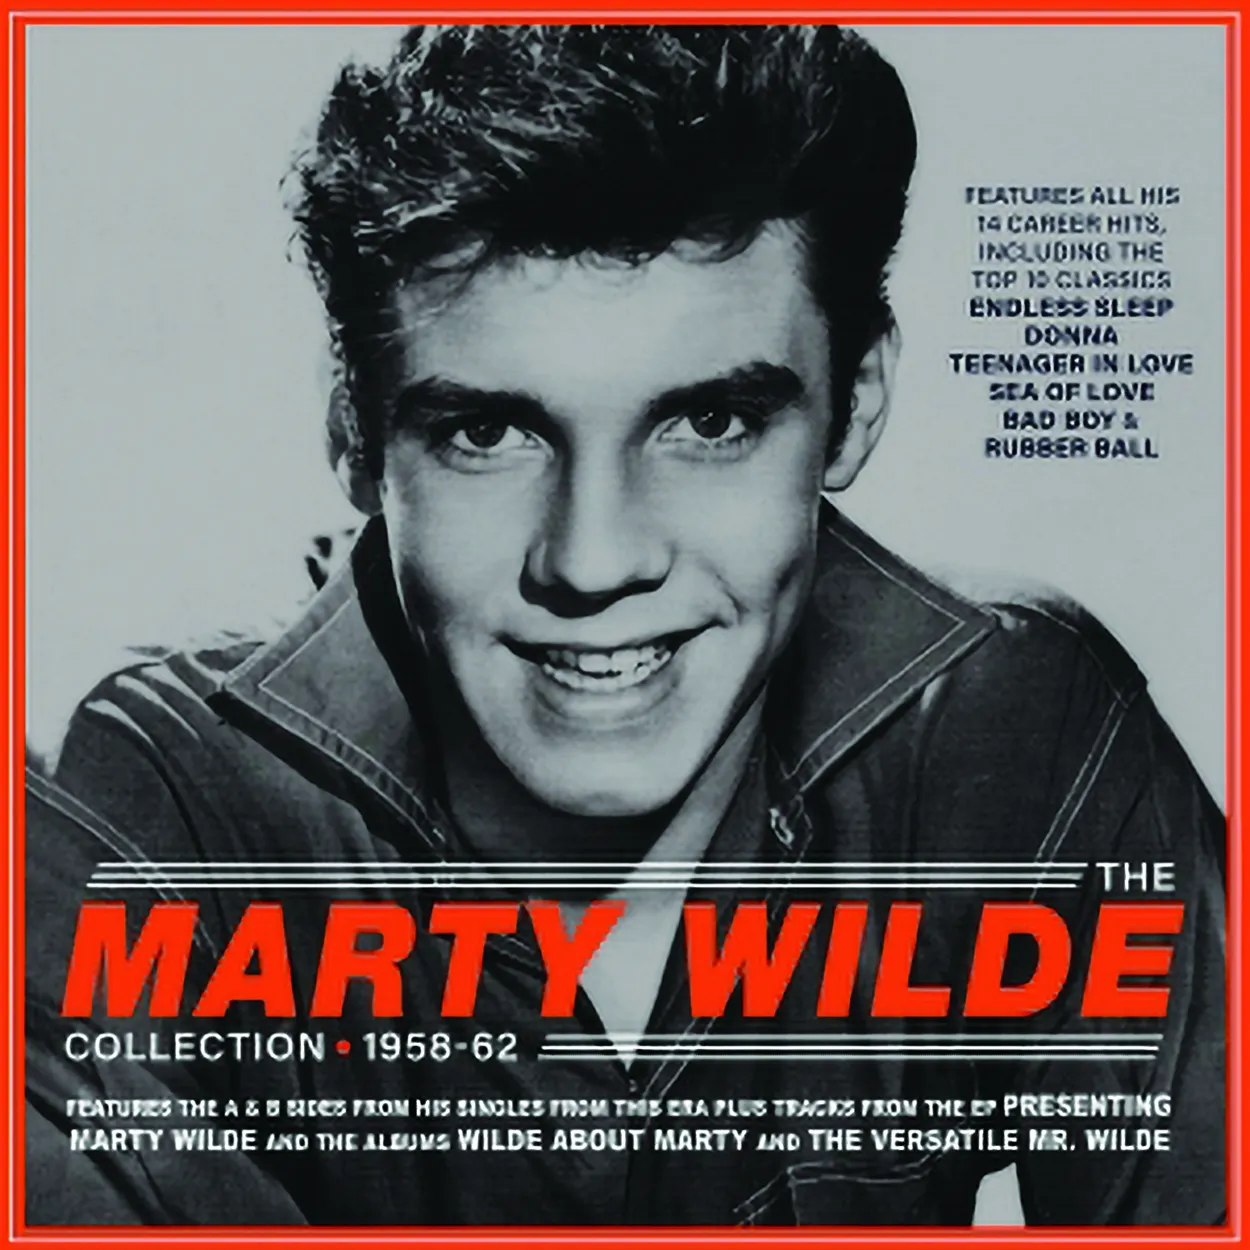 LGC2025-Marty-Wilde-The-Marty-Wilde-Collection-1-1.webp